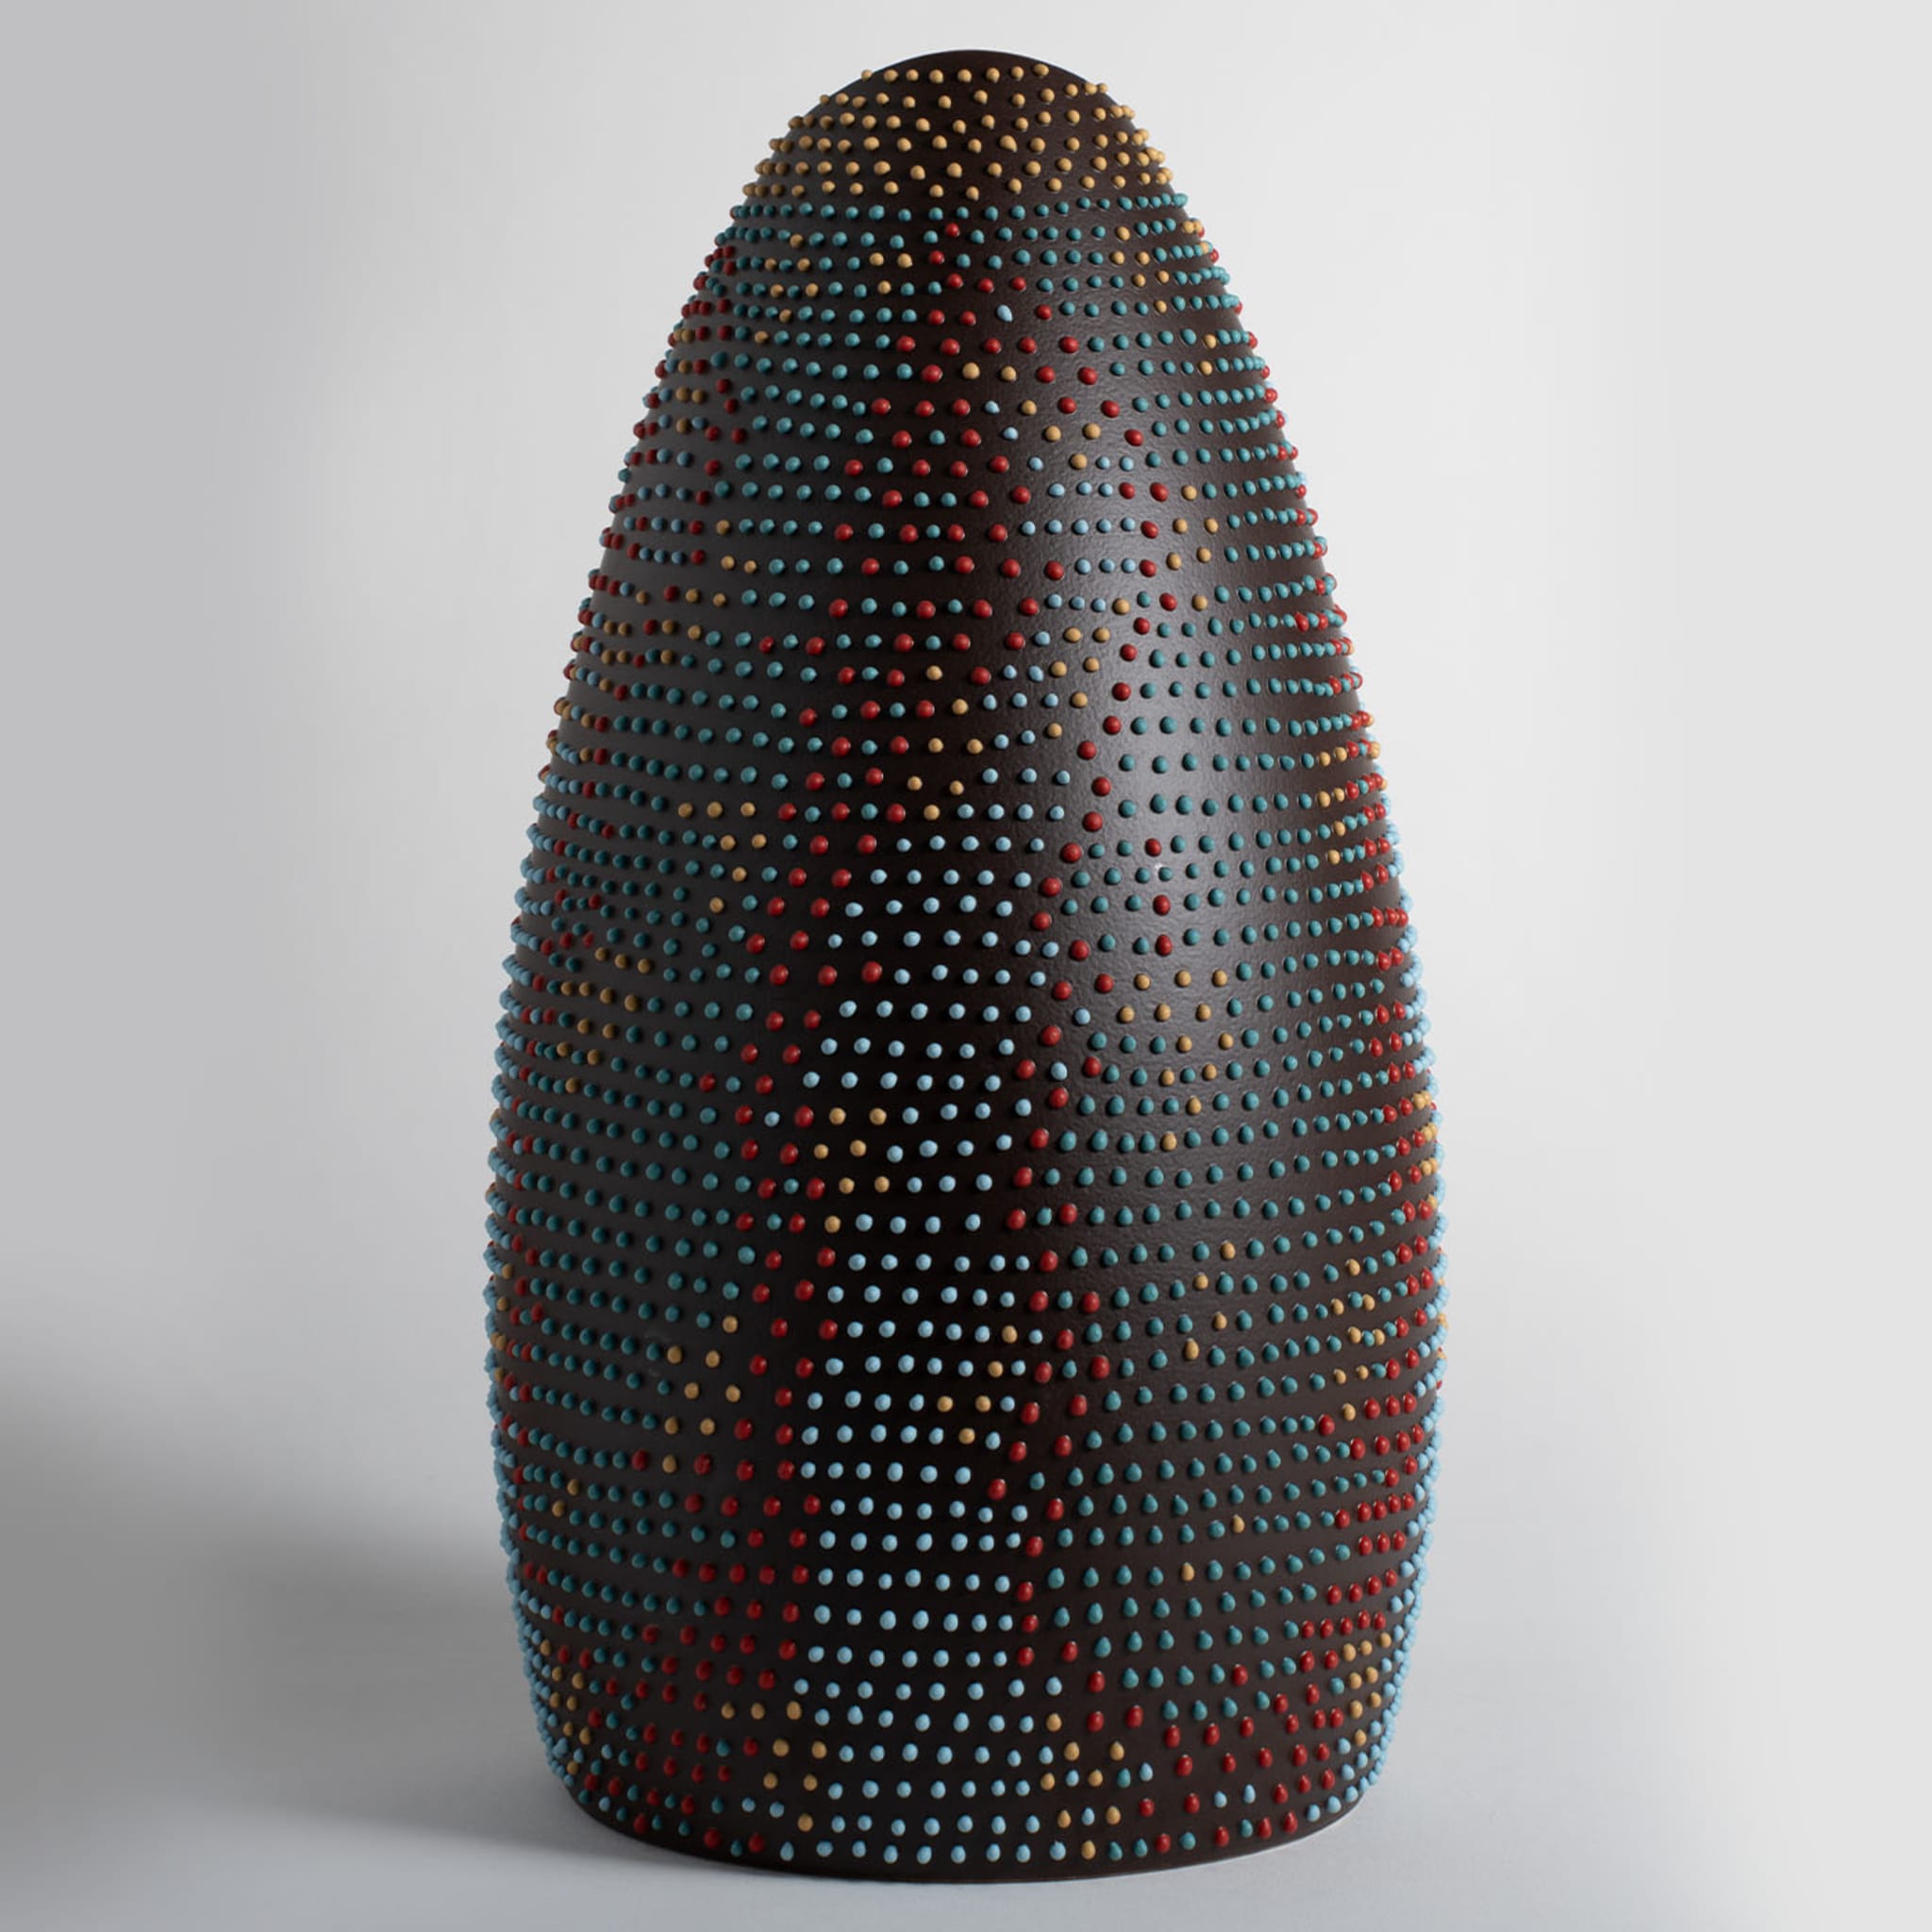 RIC-4 Chameleon Polychrome Vase by A. Mancuso/Analogia Projects - Alternative view 1